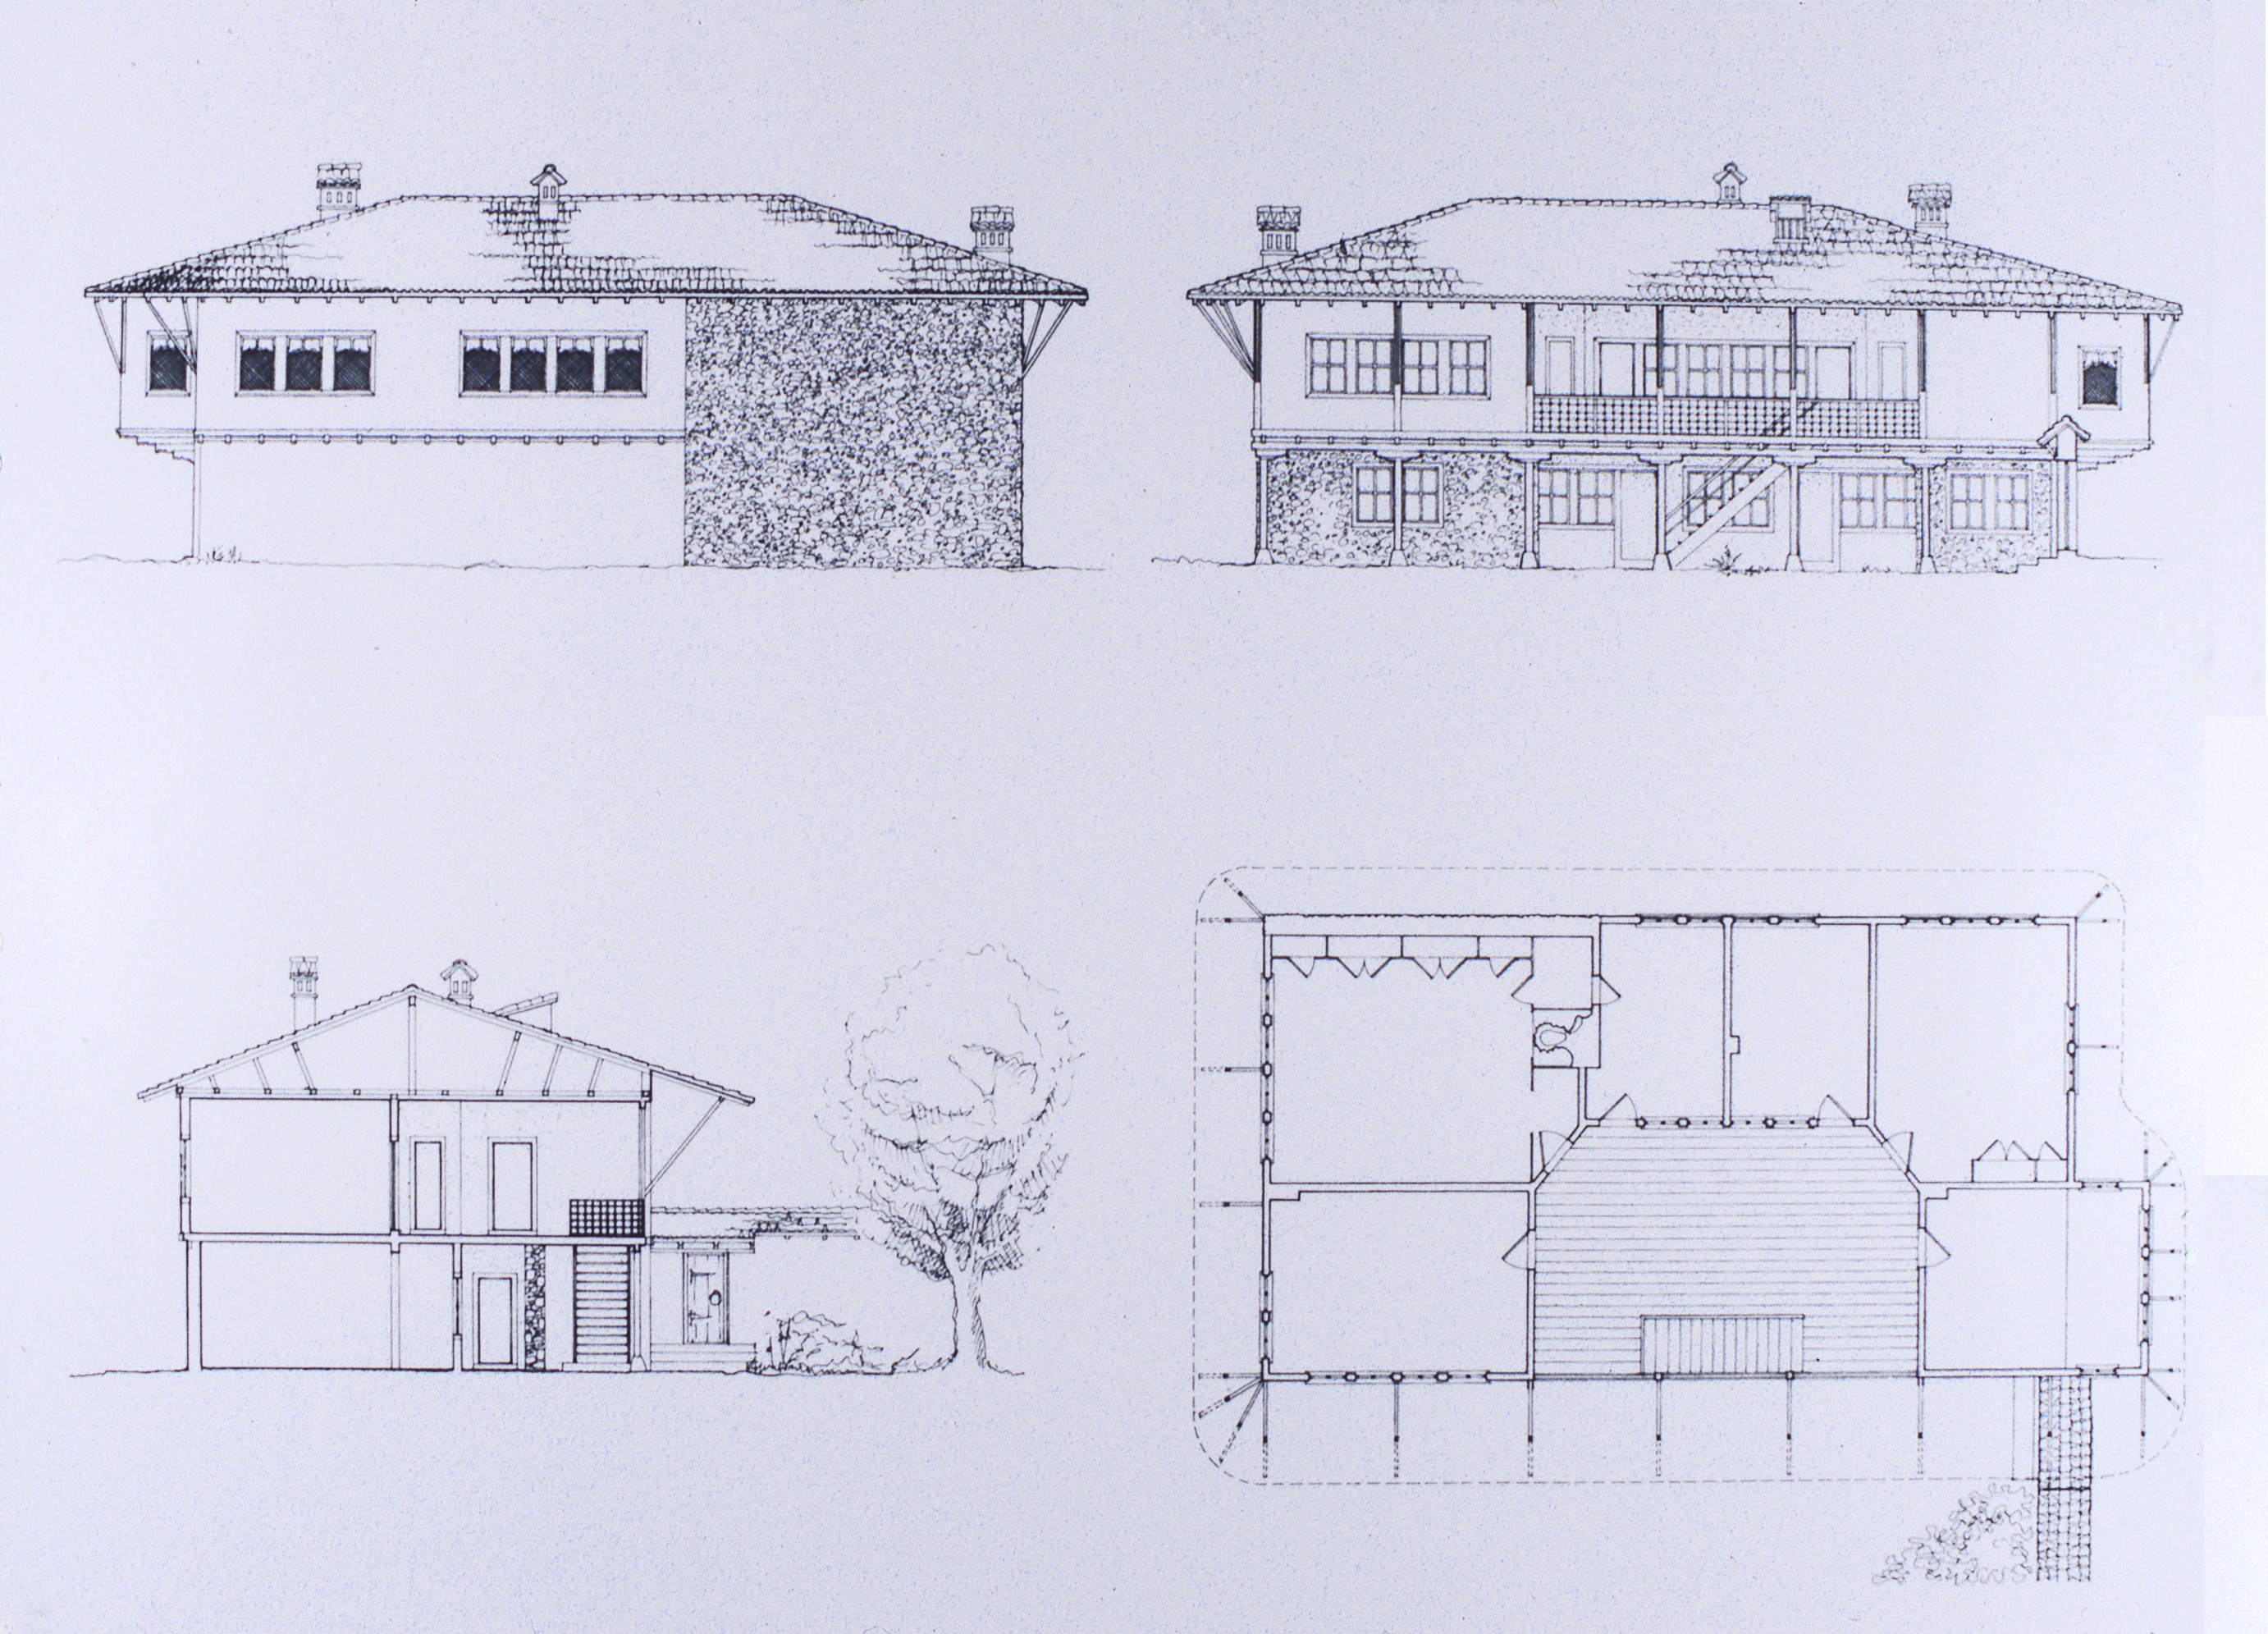 <p>These drawings show this former double house after its adaptation for institutional use. The building was constructed of thick perimeter walls with one wall that crossed through the courtyard. The upper level walls were thinner and constructed with wood framing, light infill and covered with plaster. The plan shown is the restored upper floor. The ground level had entries to the northern street and the building was divided so that two courtyards existed, each with its own gallery and stair. </p>